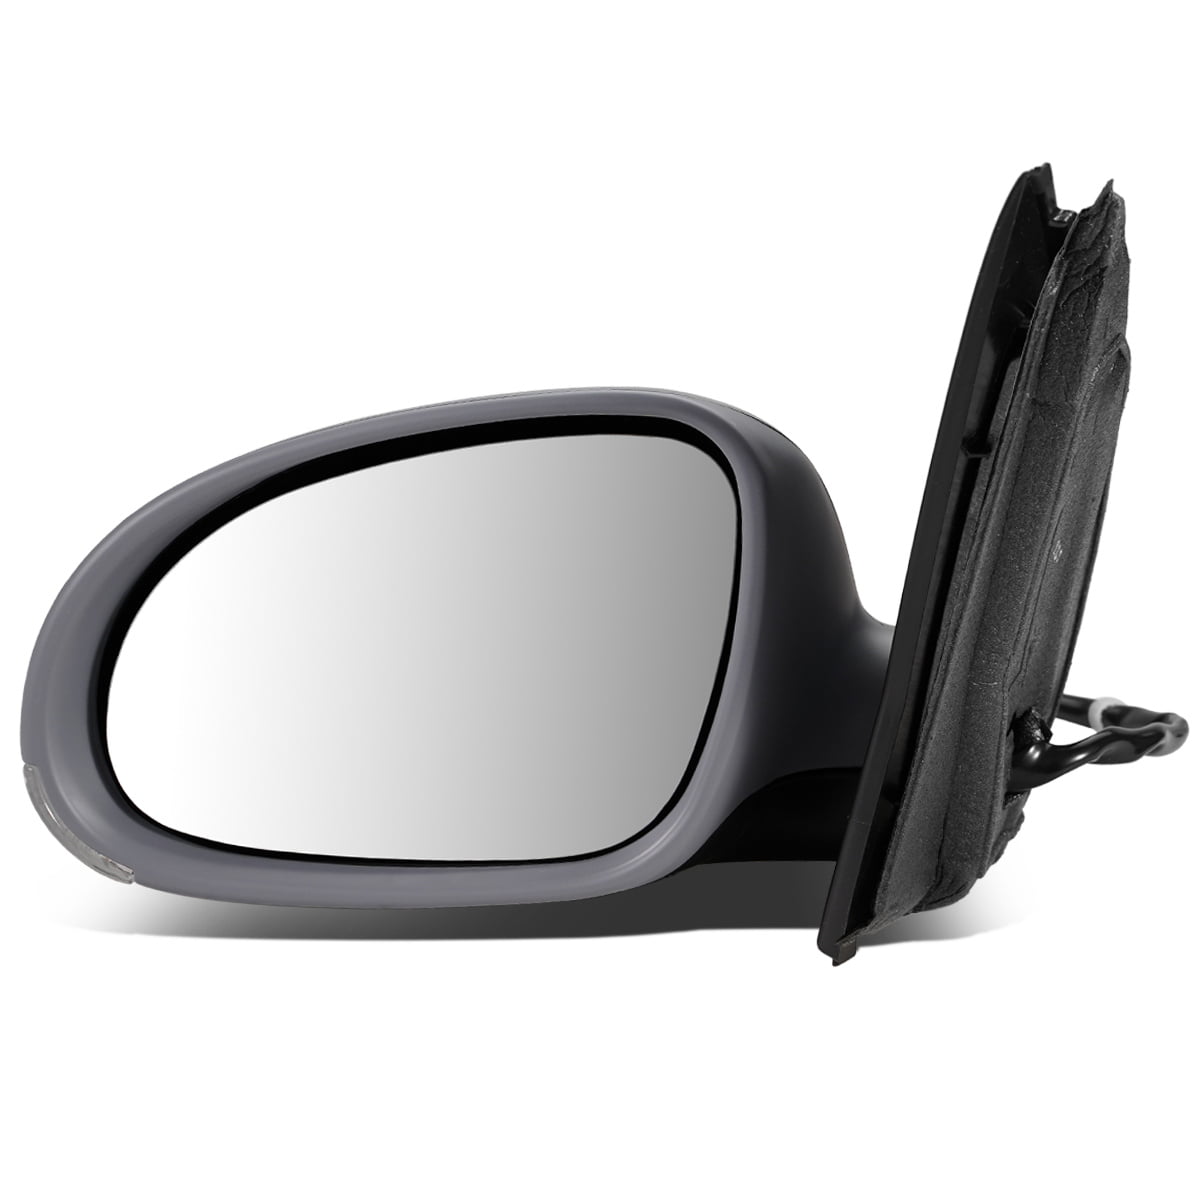 R Passenger Side Manual Adjust Foldable OE Replacement Mirror for 07-17 Compass